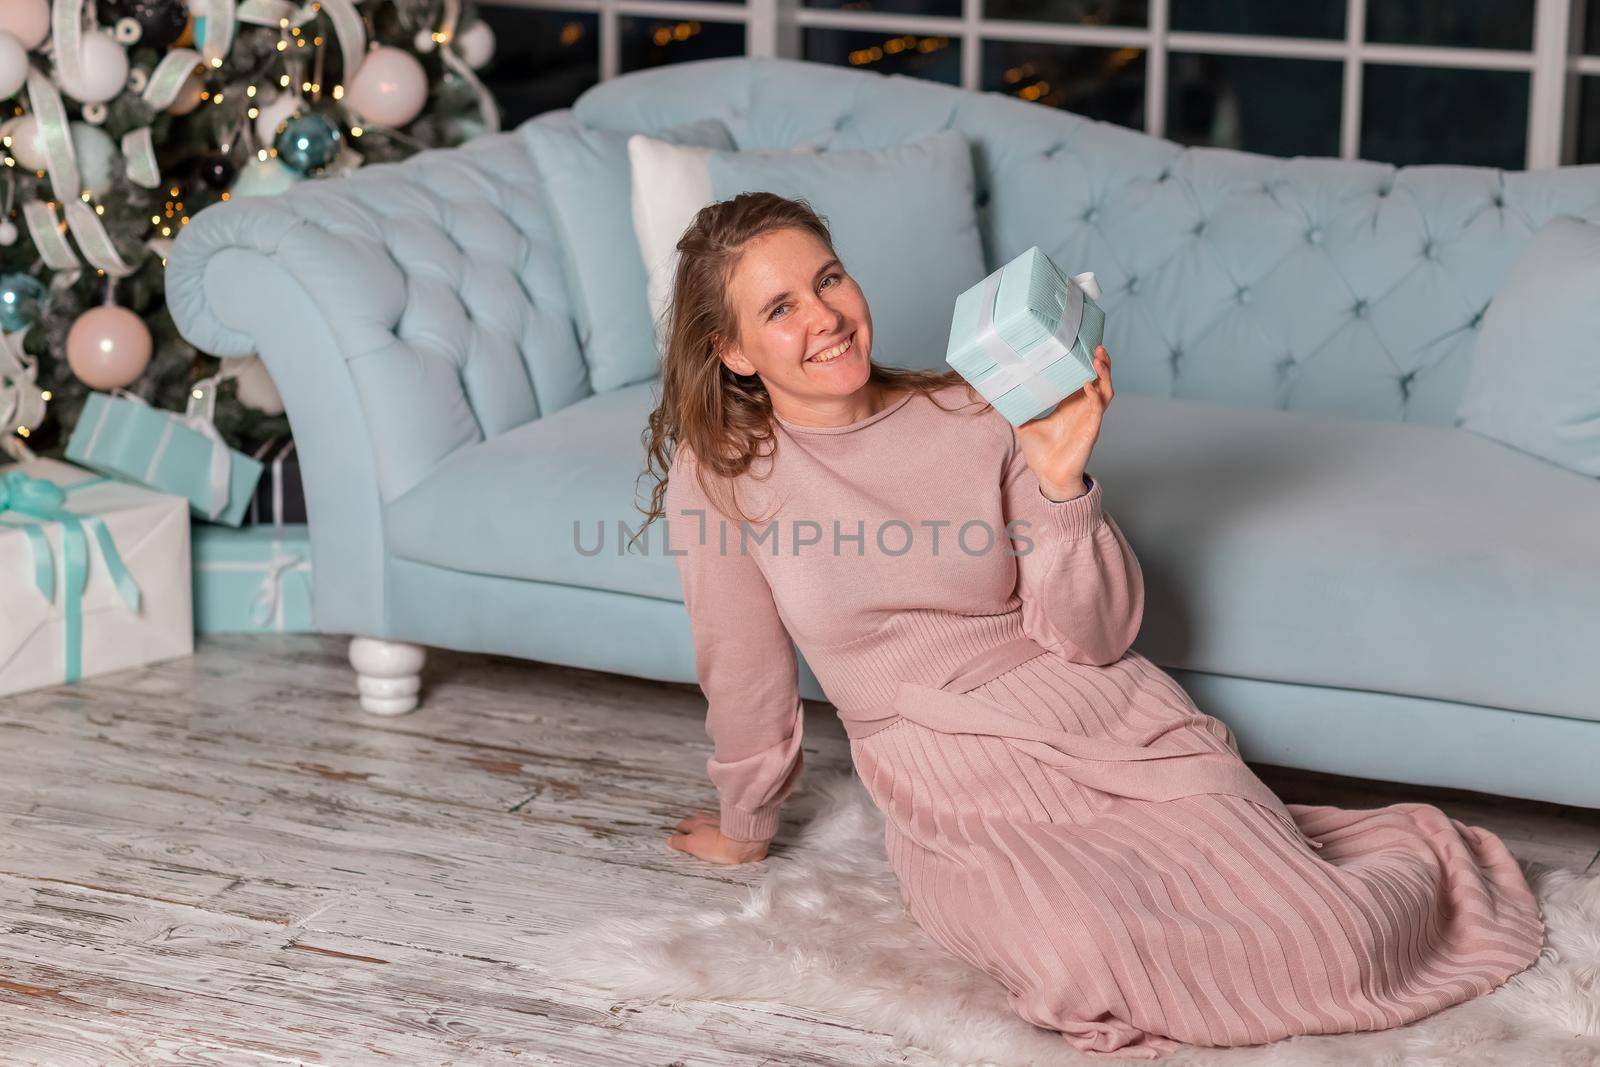 Beautiful middle-aged woman excited opening Christmas presents near the Christmas tree on Christmas eve